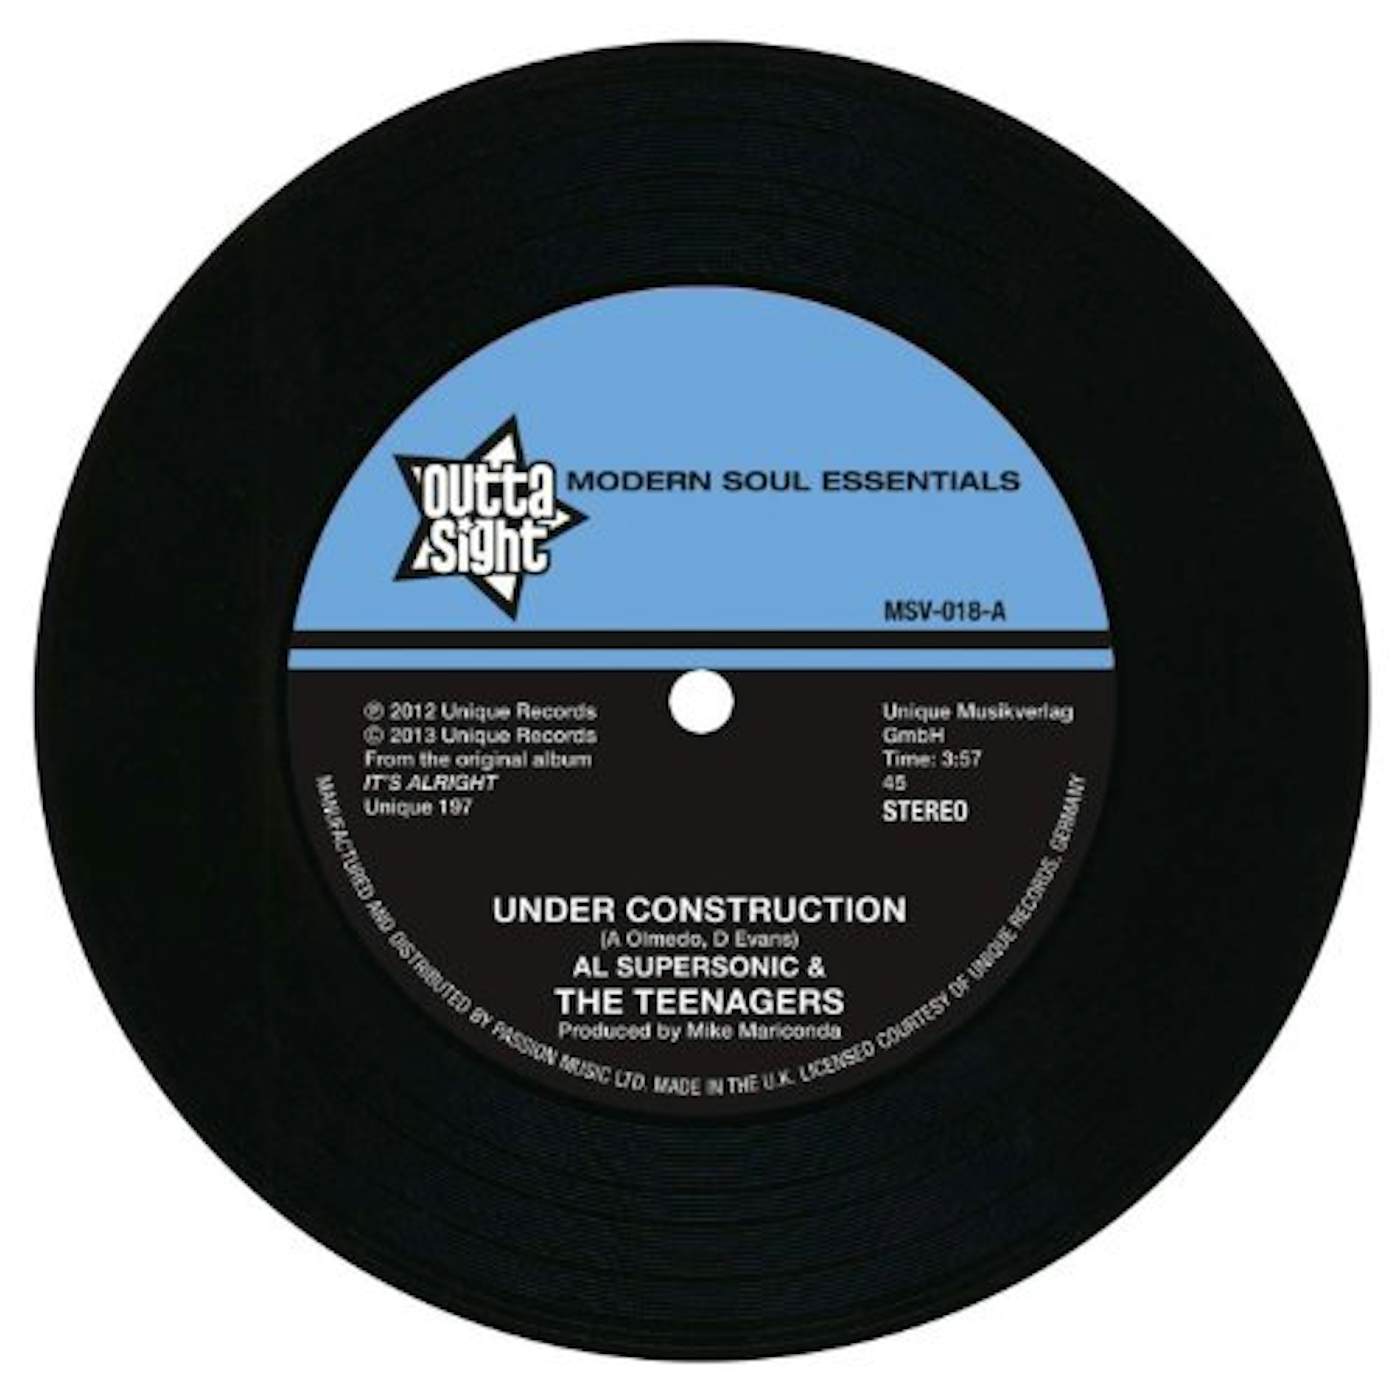 Al Supersonic & The Teenagers UNDER CONSTRUCTION/THE LOSER Vinyl Record